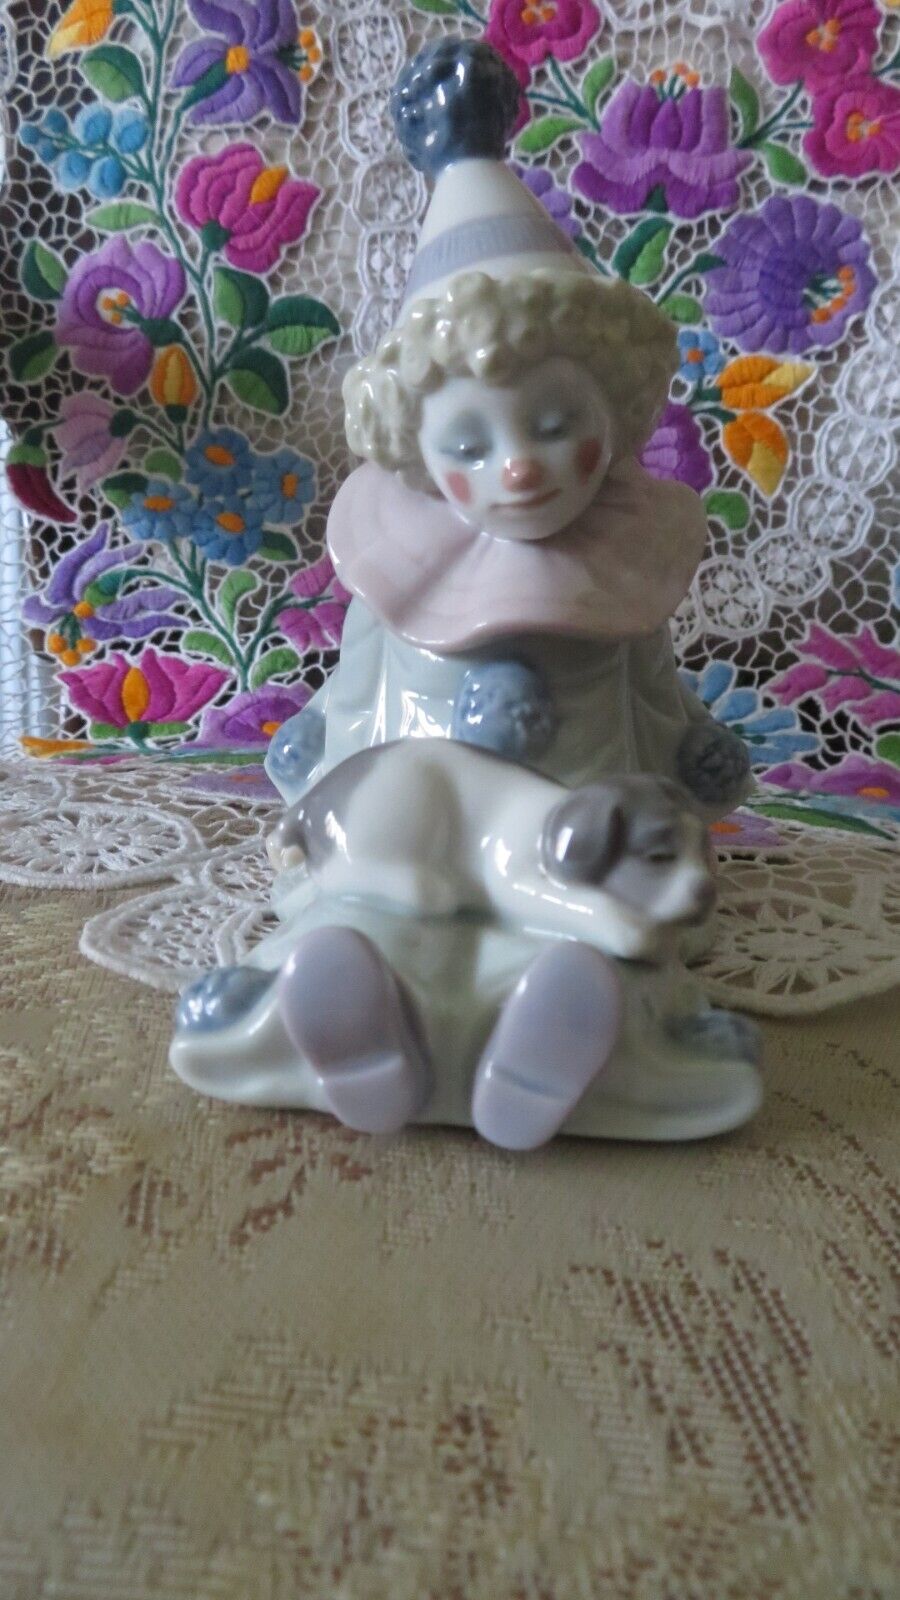 Lladro Retired “Pierrot with Sleeping Puppy” # 5277 Figurine Made in Spain 5”